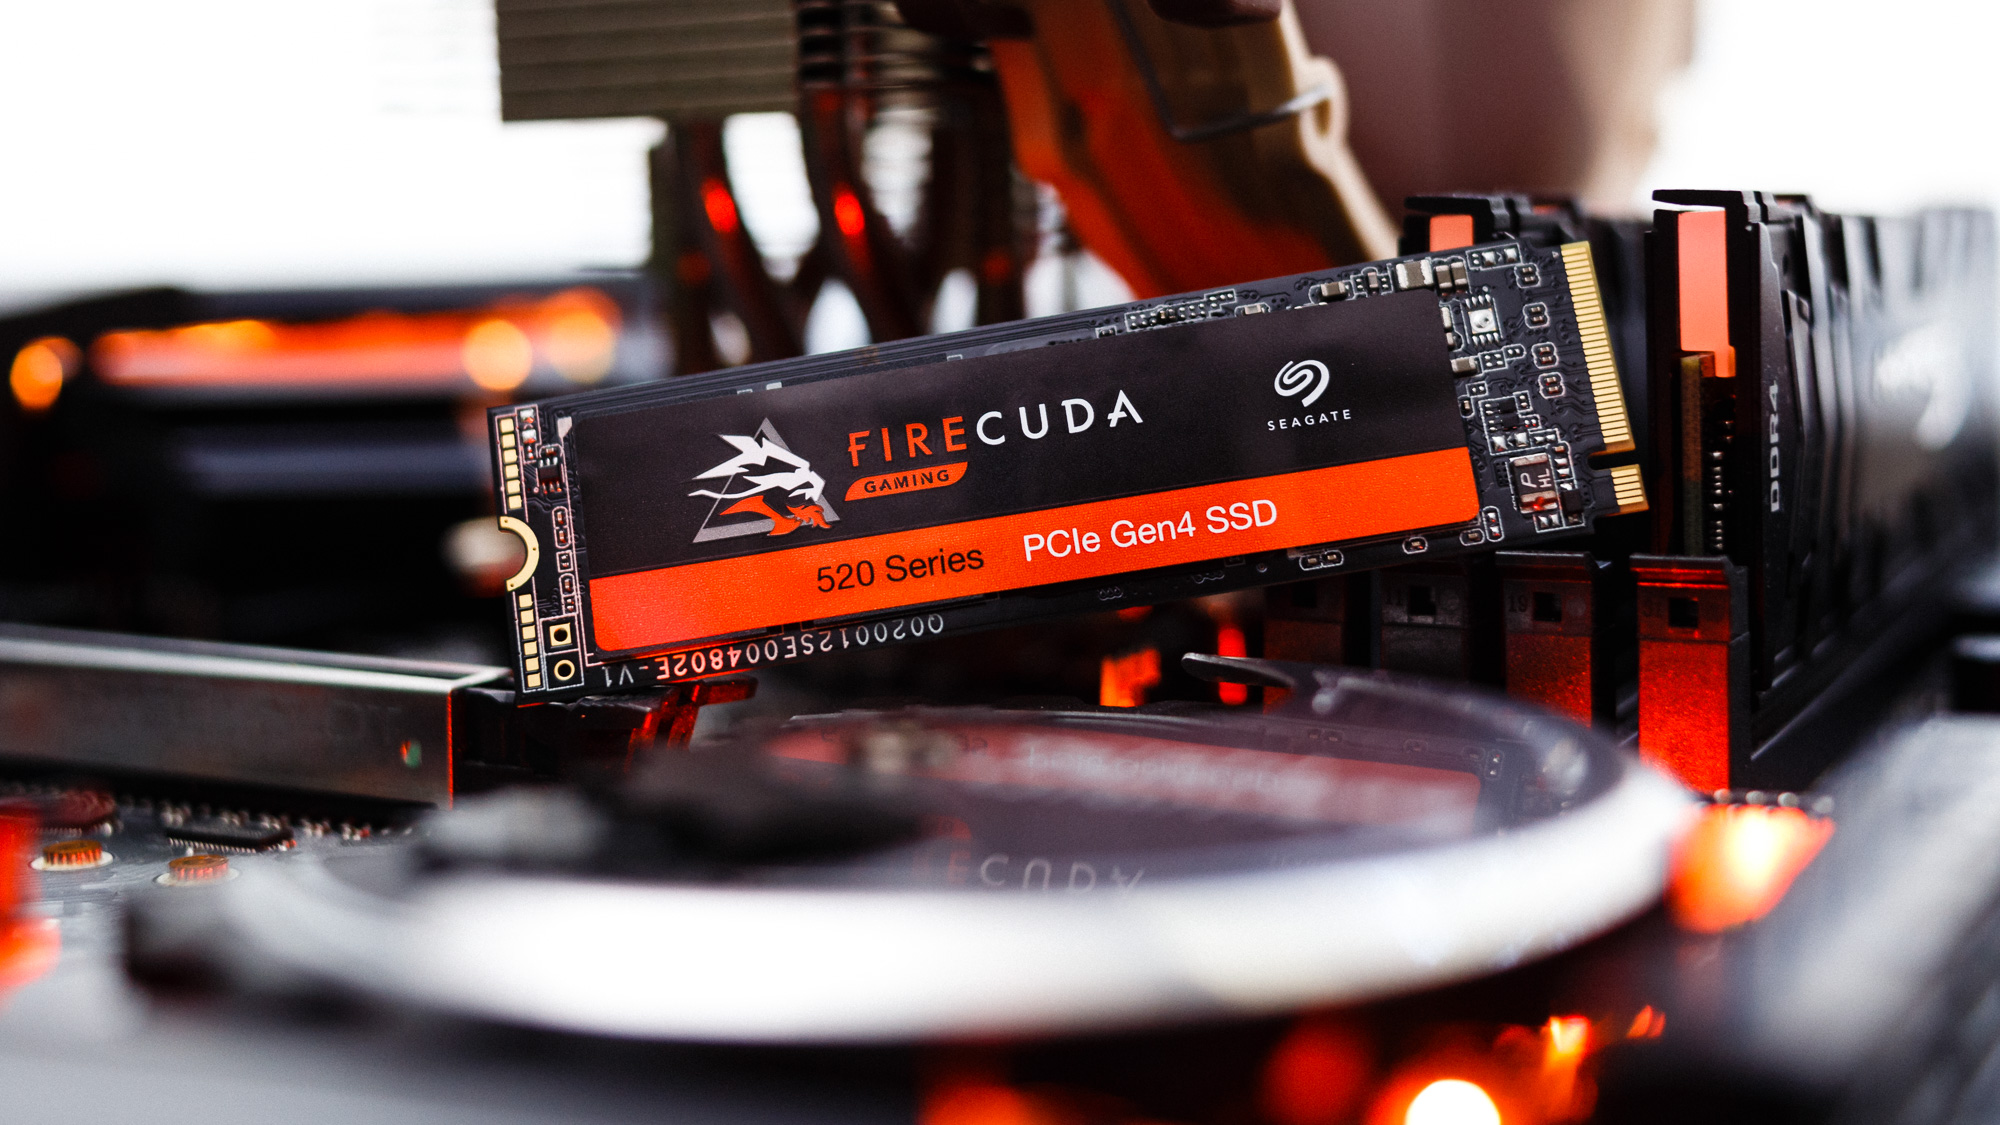 Seagate FireCuda 520 SSD Review: Big Performance in an Expensive